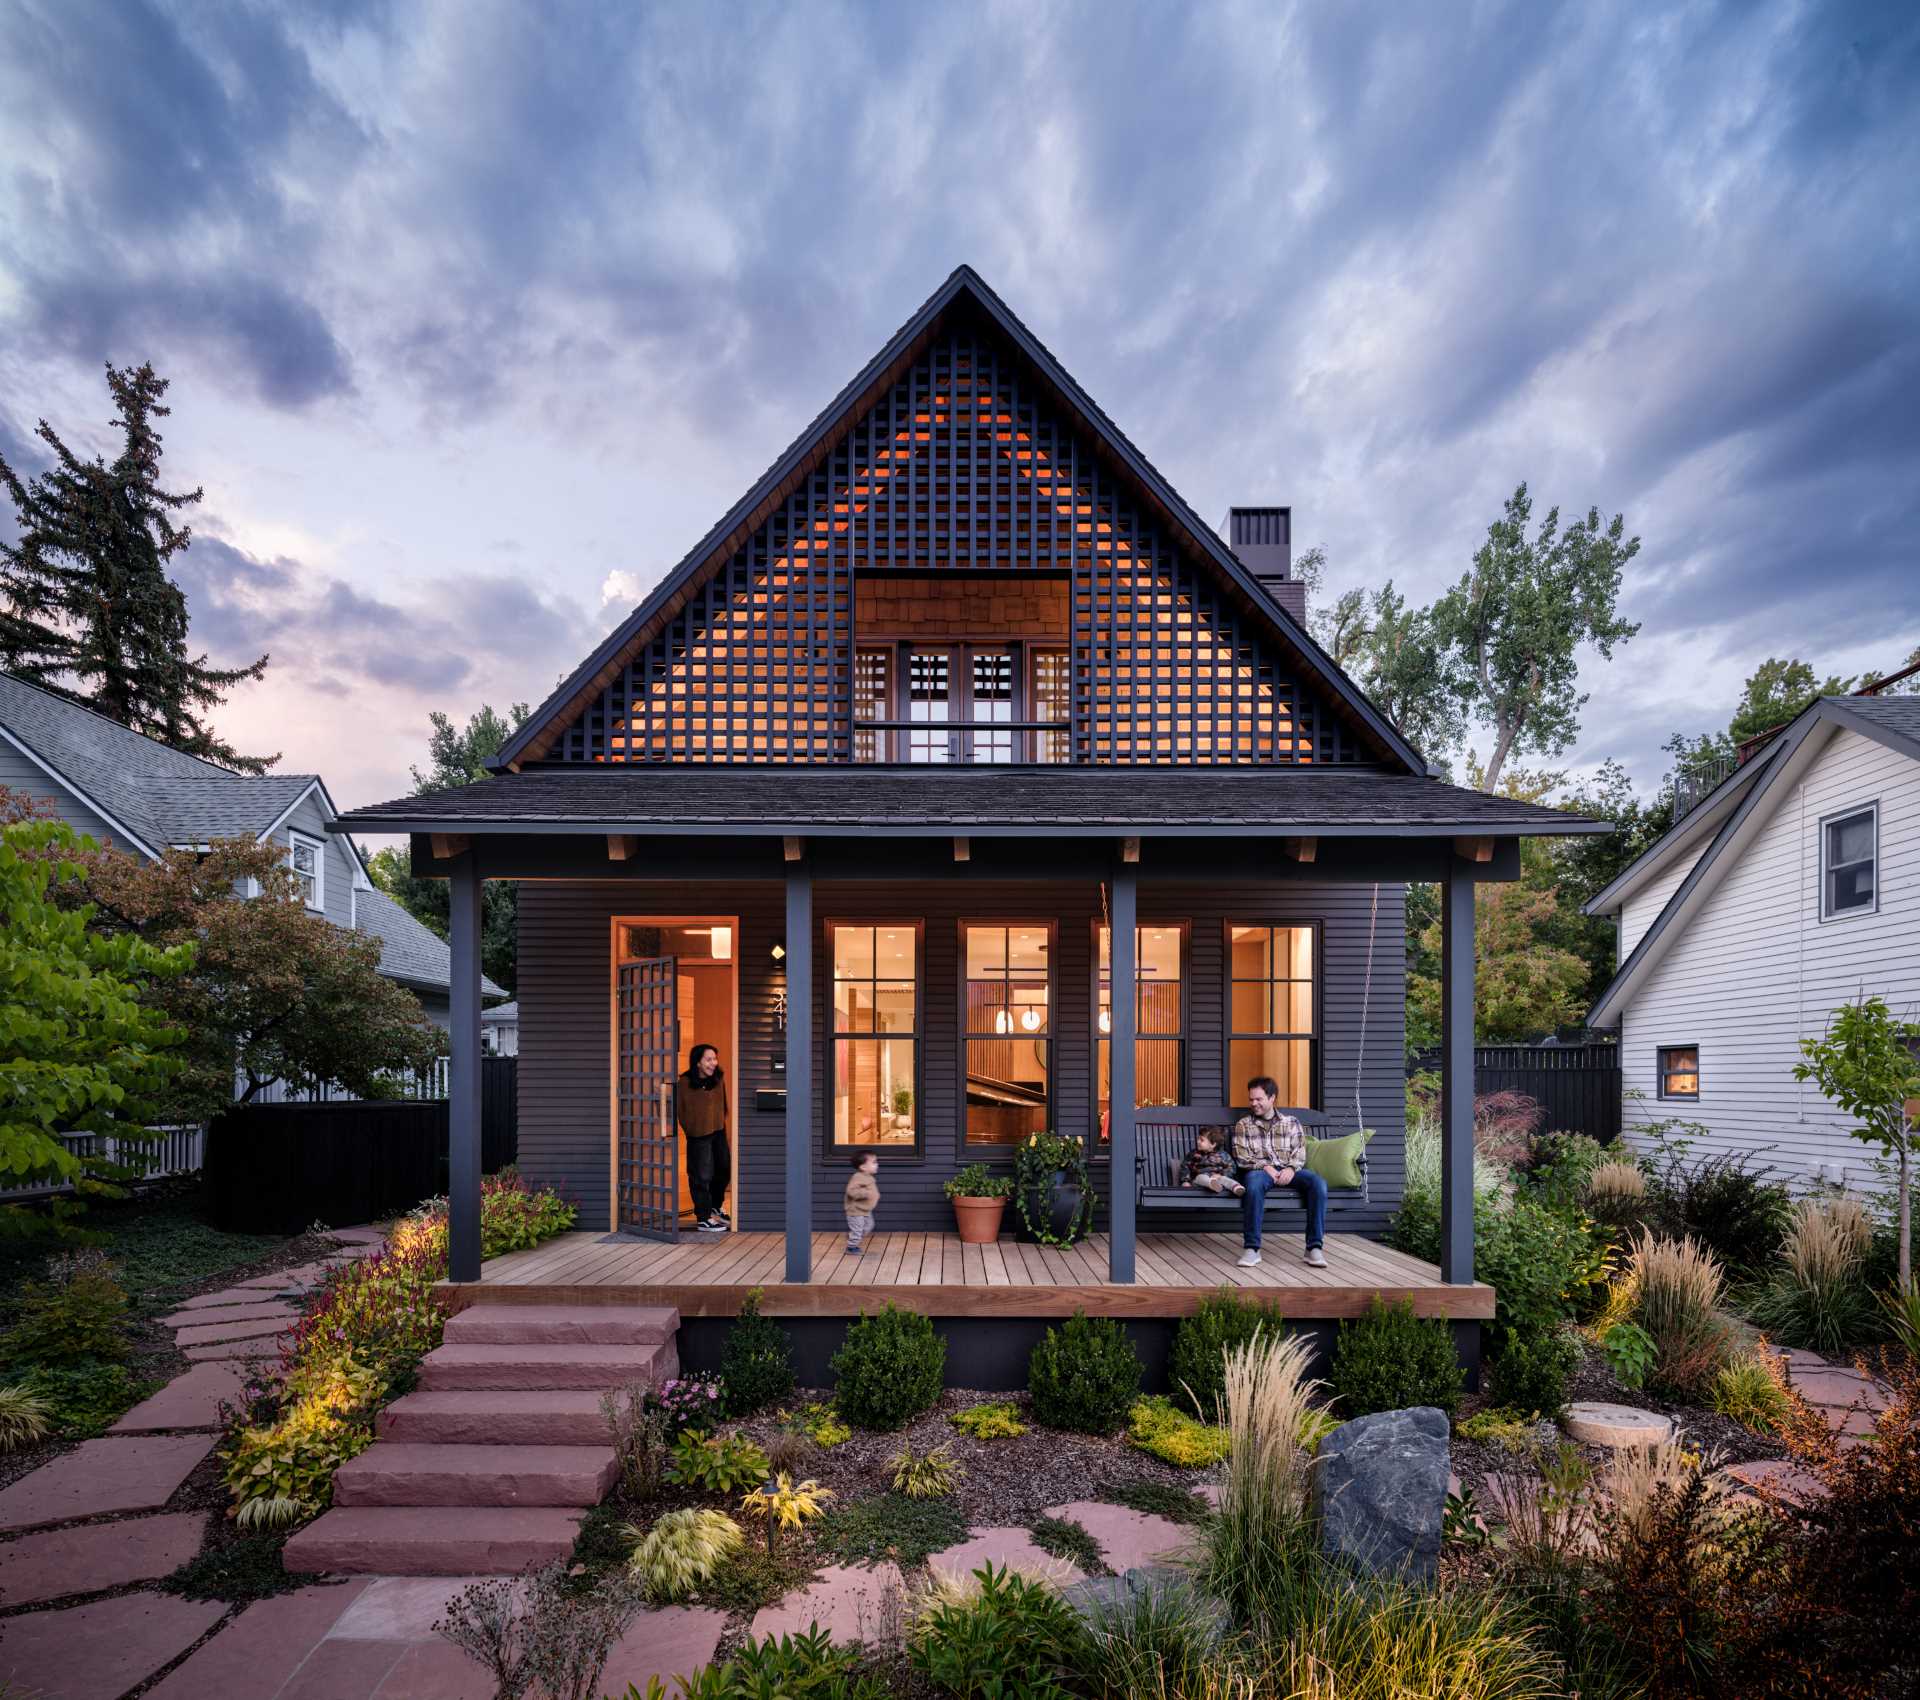 A new home was inspired by the nearby historic houses in the neighborhood.